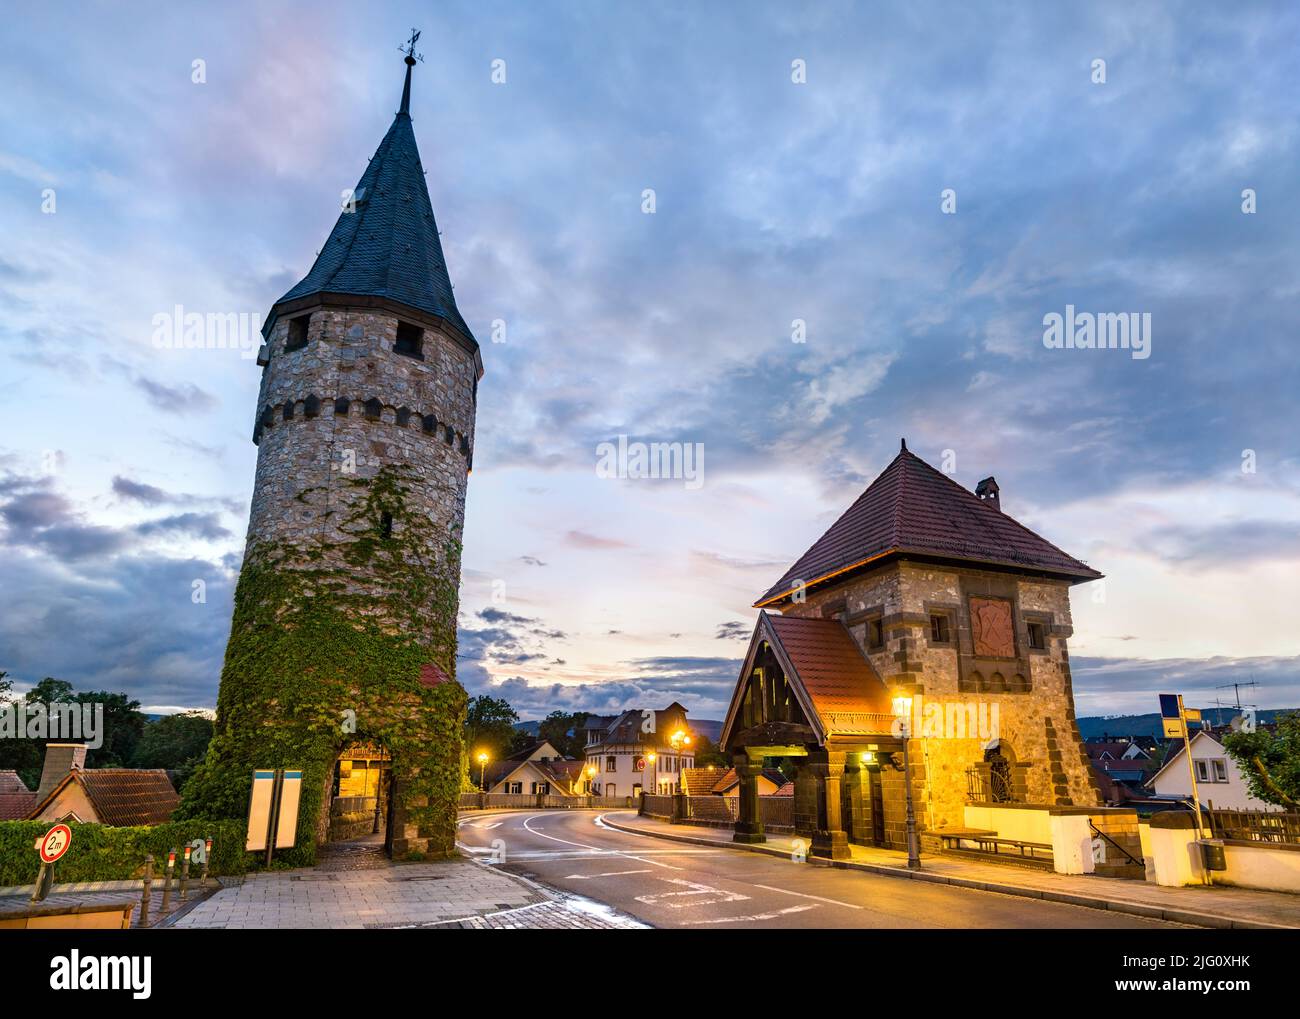 Witches Tower and Watch Guard Tower in Bad Homburg near Frankfurt in Germany Stock Photo